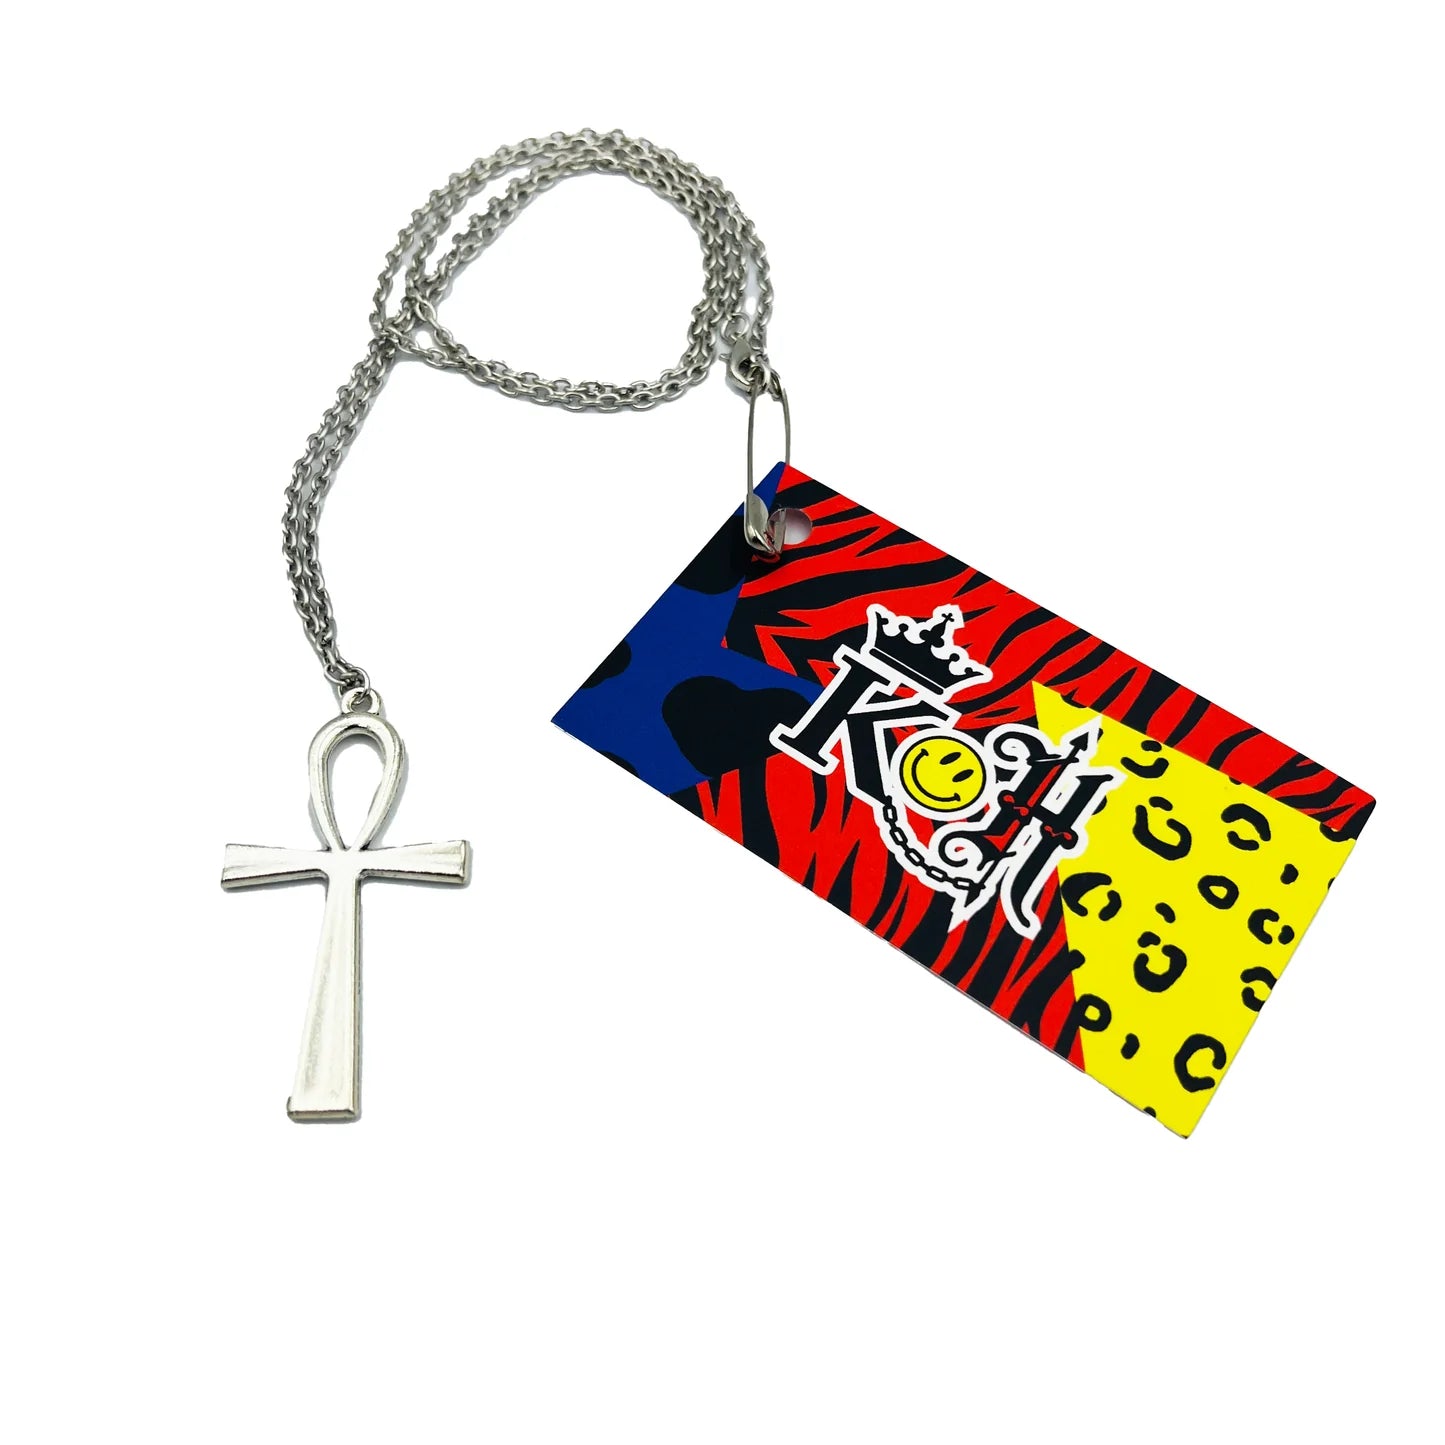 Ankh necklace by King of Hearts